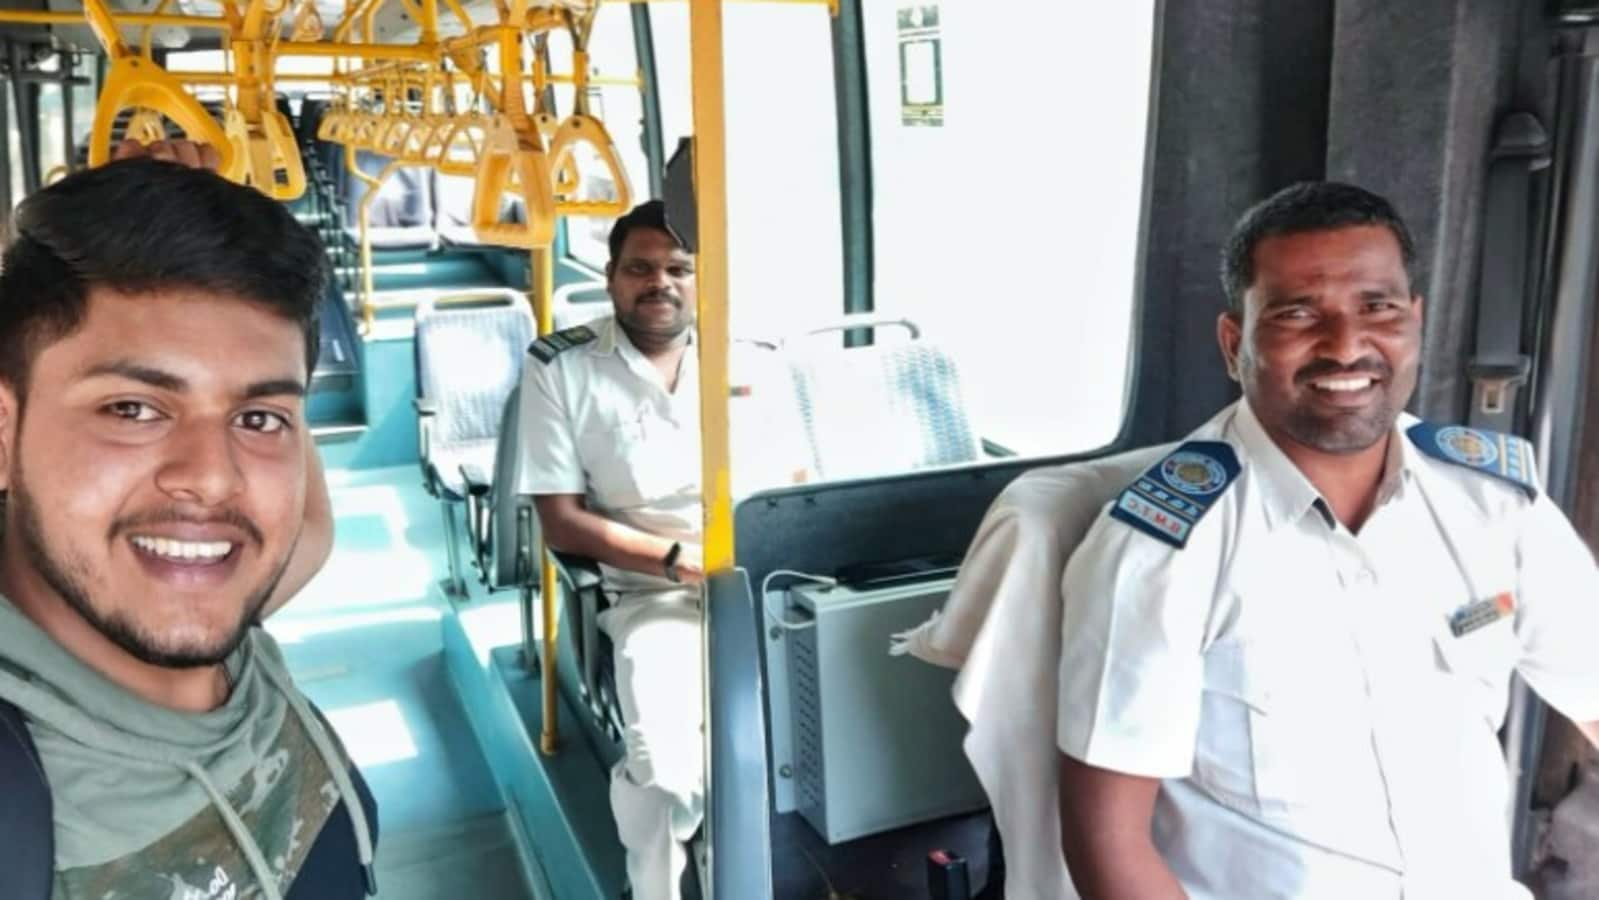 BMTC bus travel with only 1 passenger from Bengaluru airport, netizens laud them